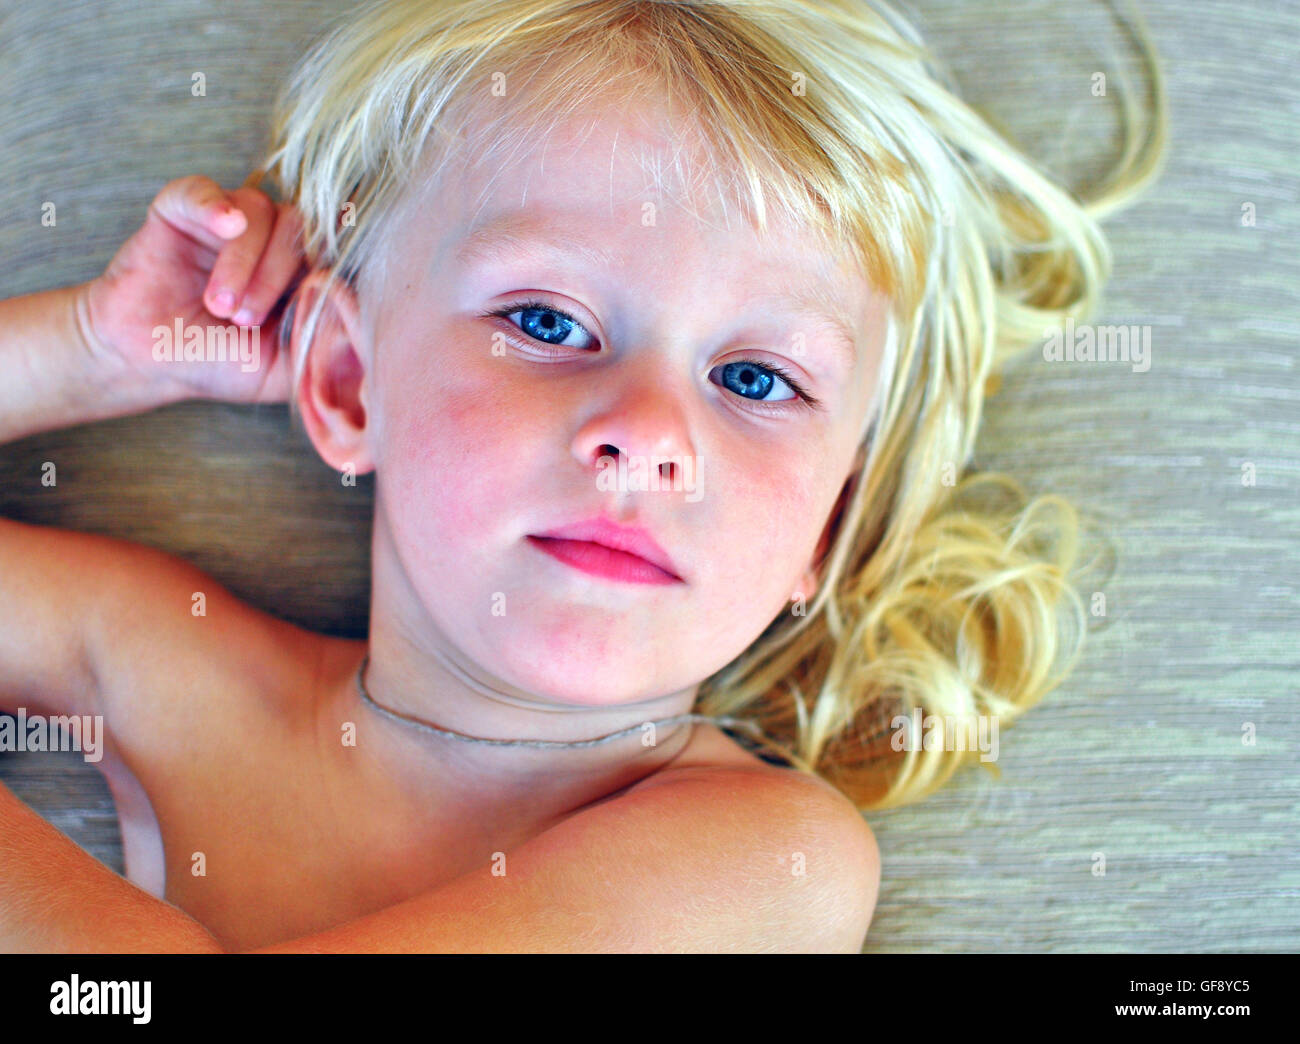 Portrait of a little boy with a long blonde hair Stock Photo